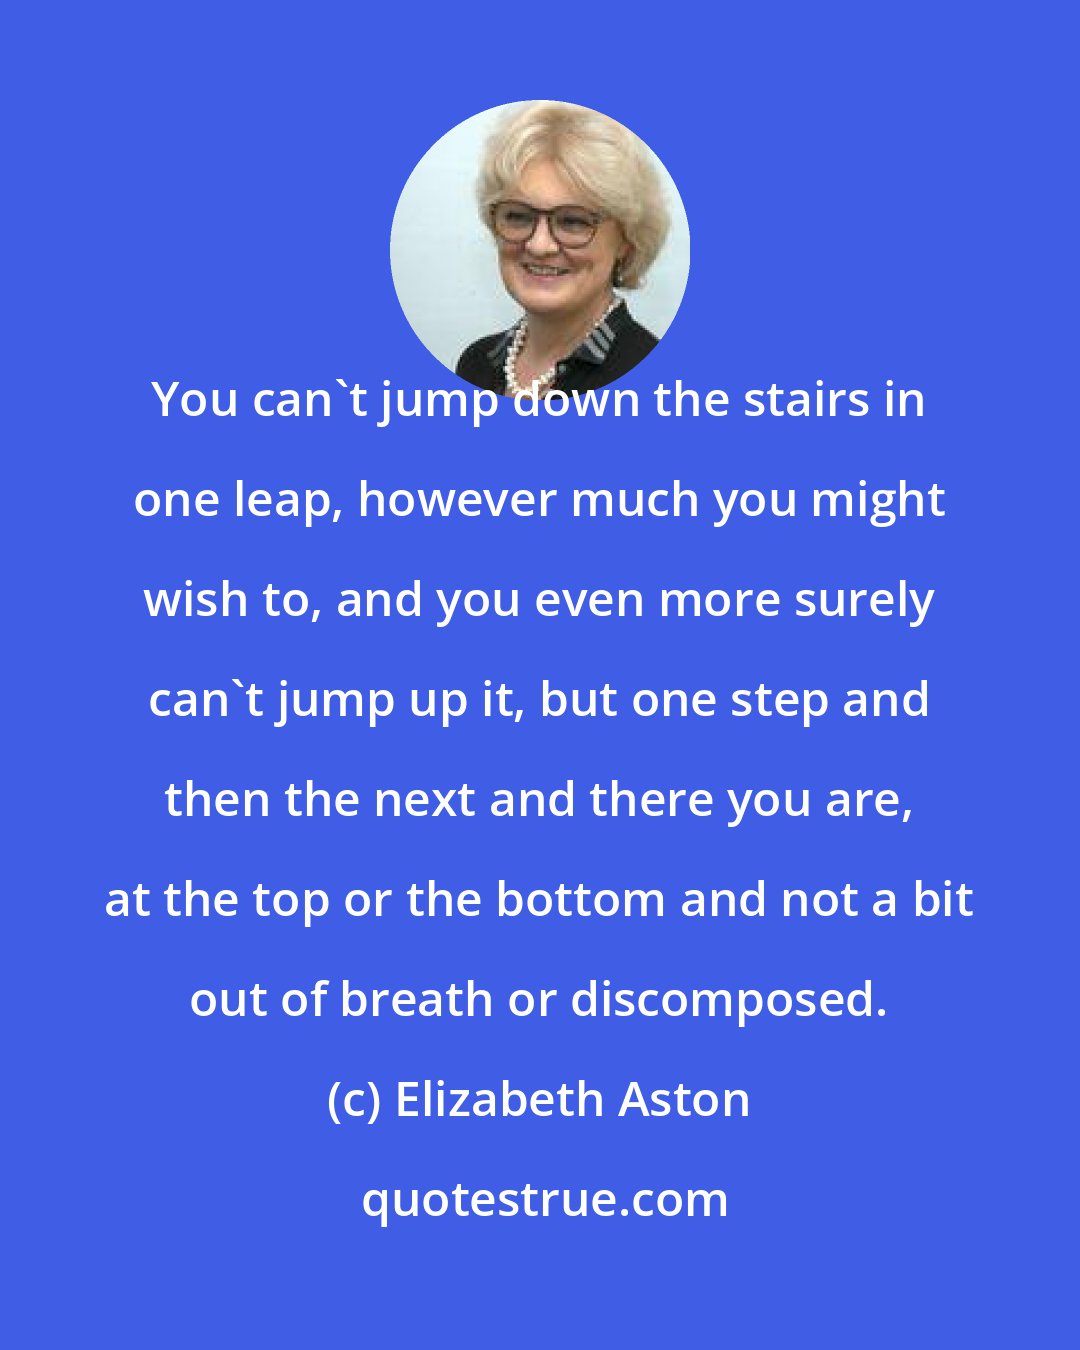 Elizabeth Aston: You can't jump down the stairs in one leap, however much you might wish to, and you even more surely can't jump up it, but one step and then the next and there you are, at the top or the bottom and not a bit out of breath or discomposed.